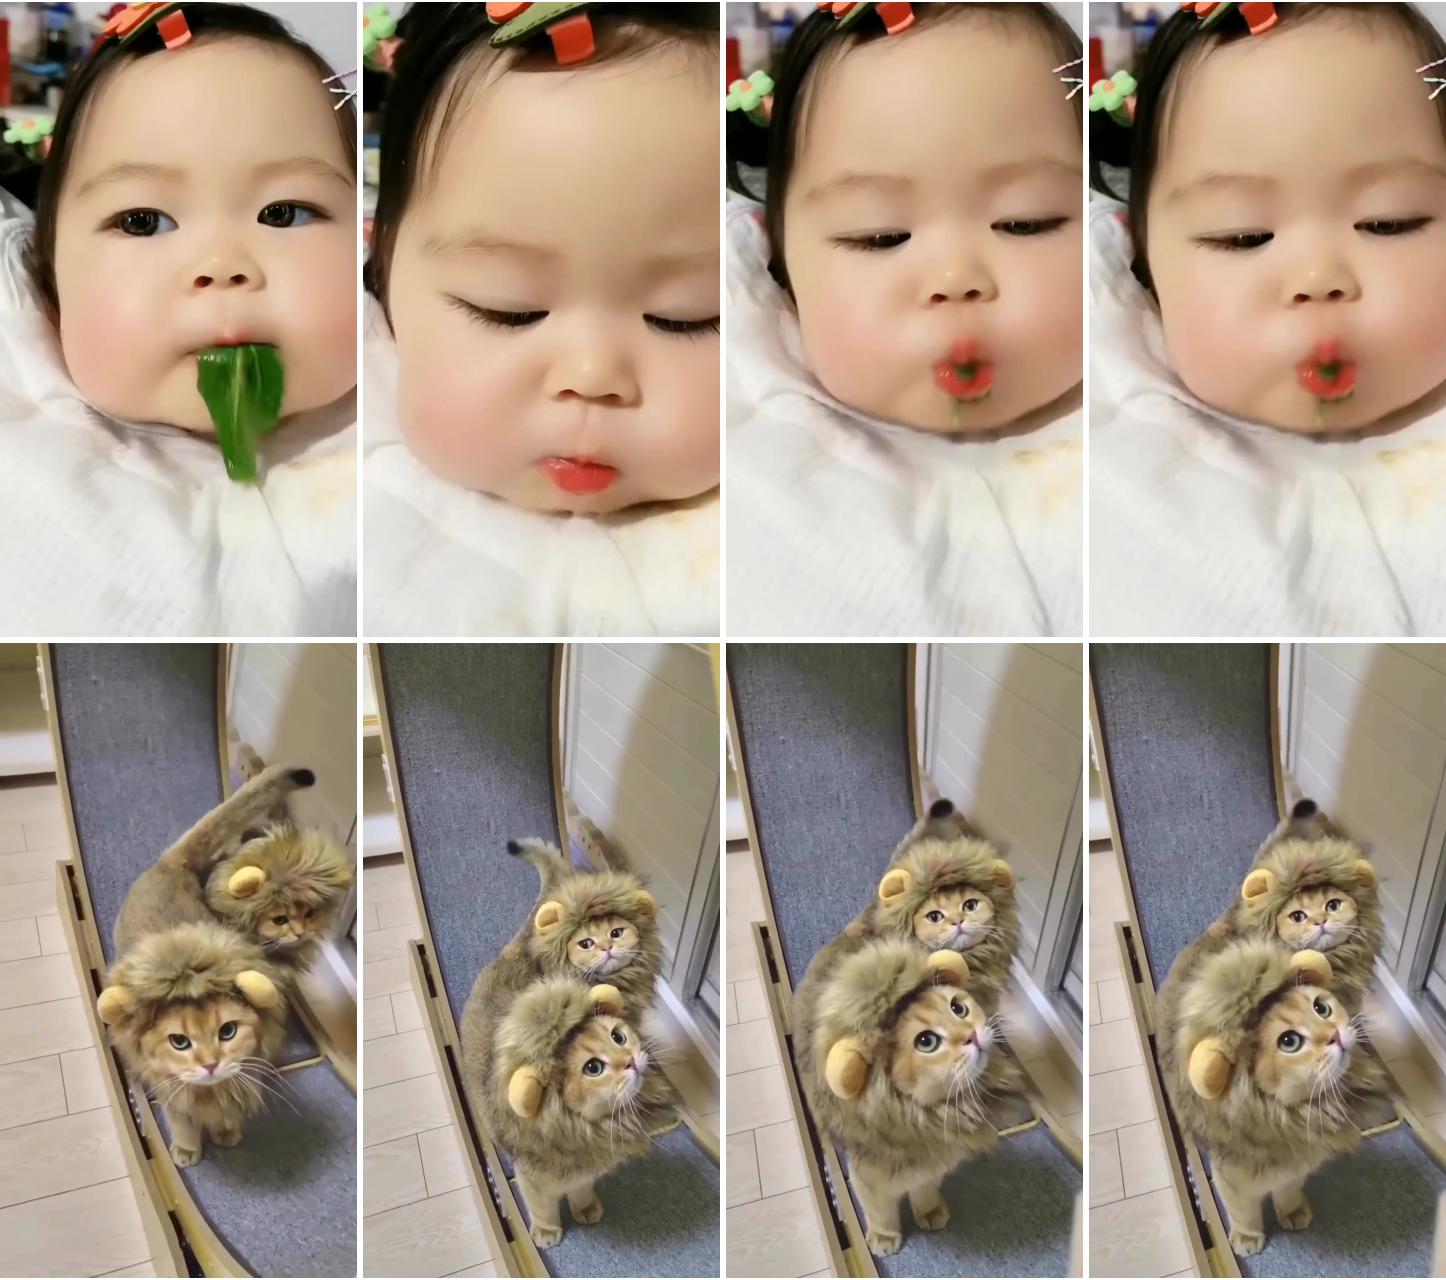 Kittens dressed up as lions; cute funny babies